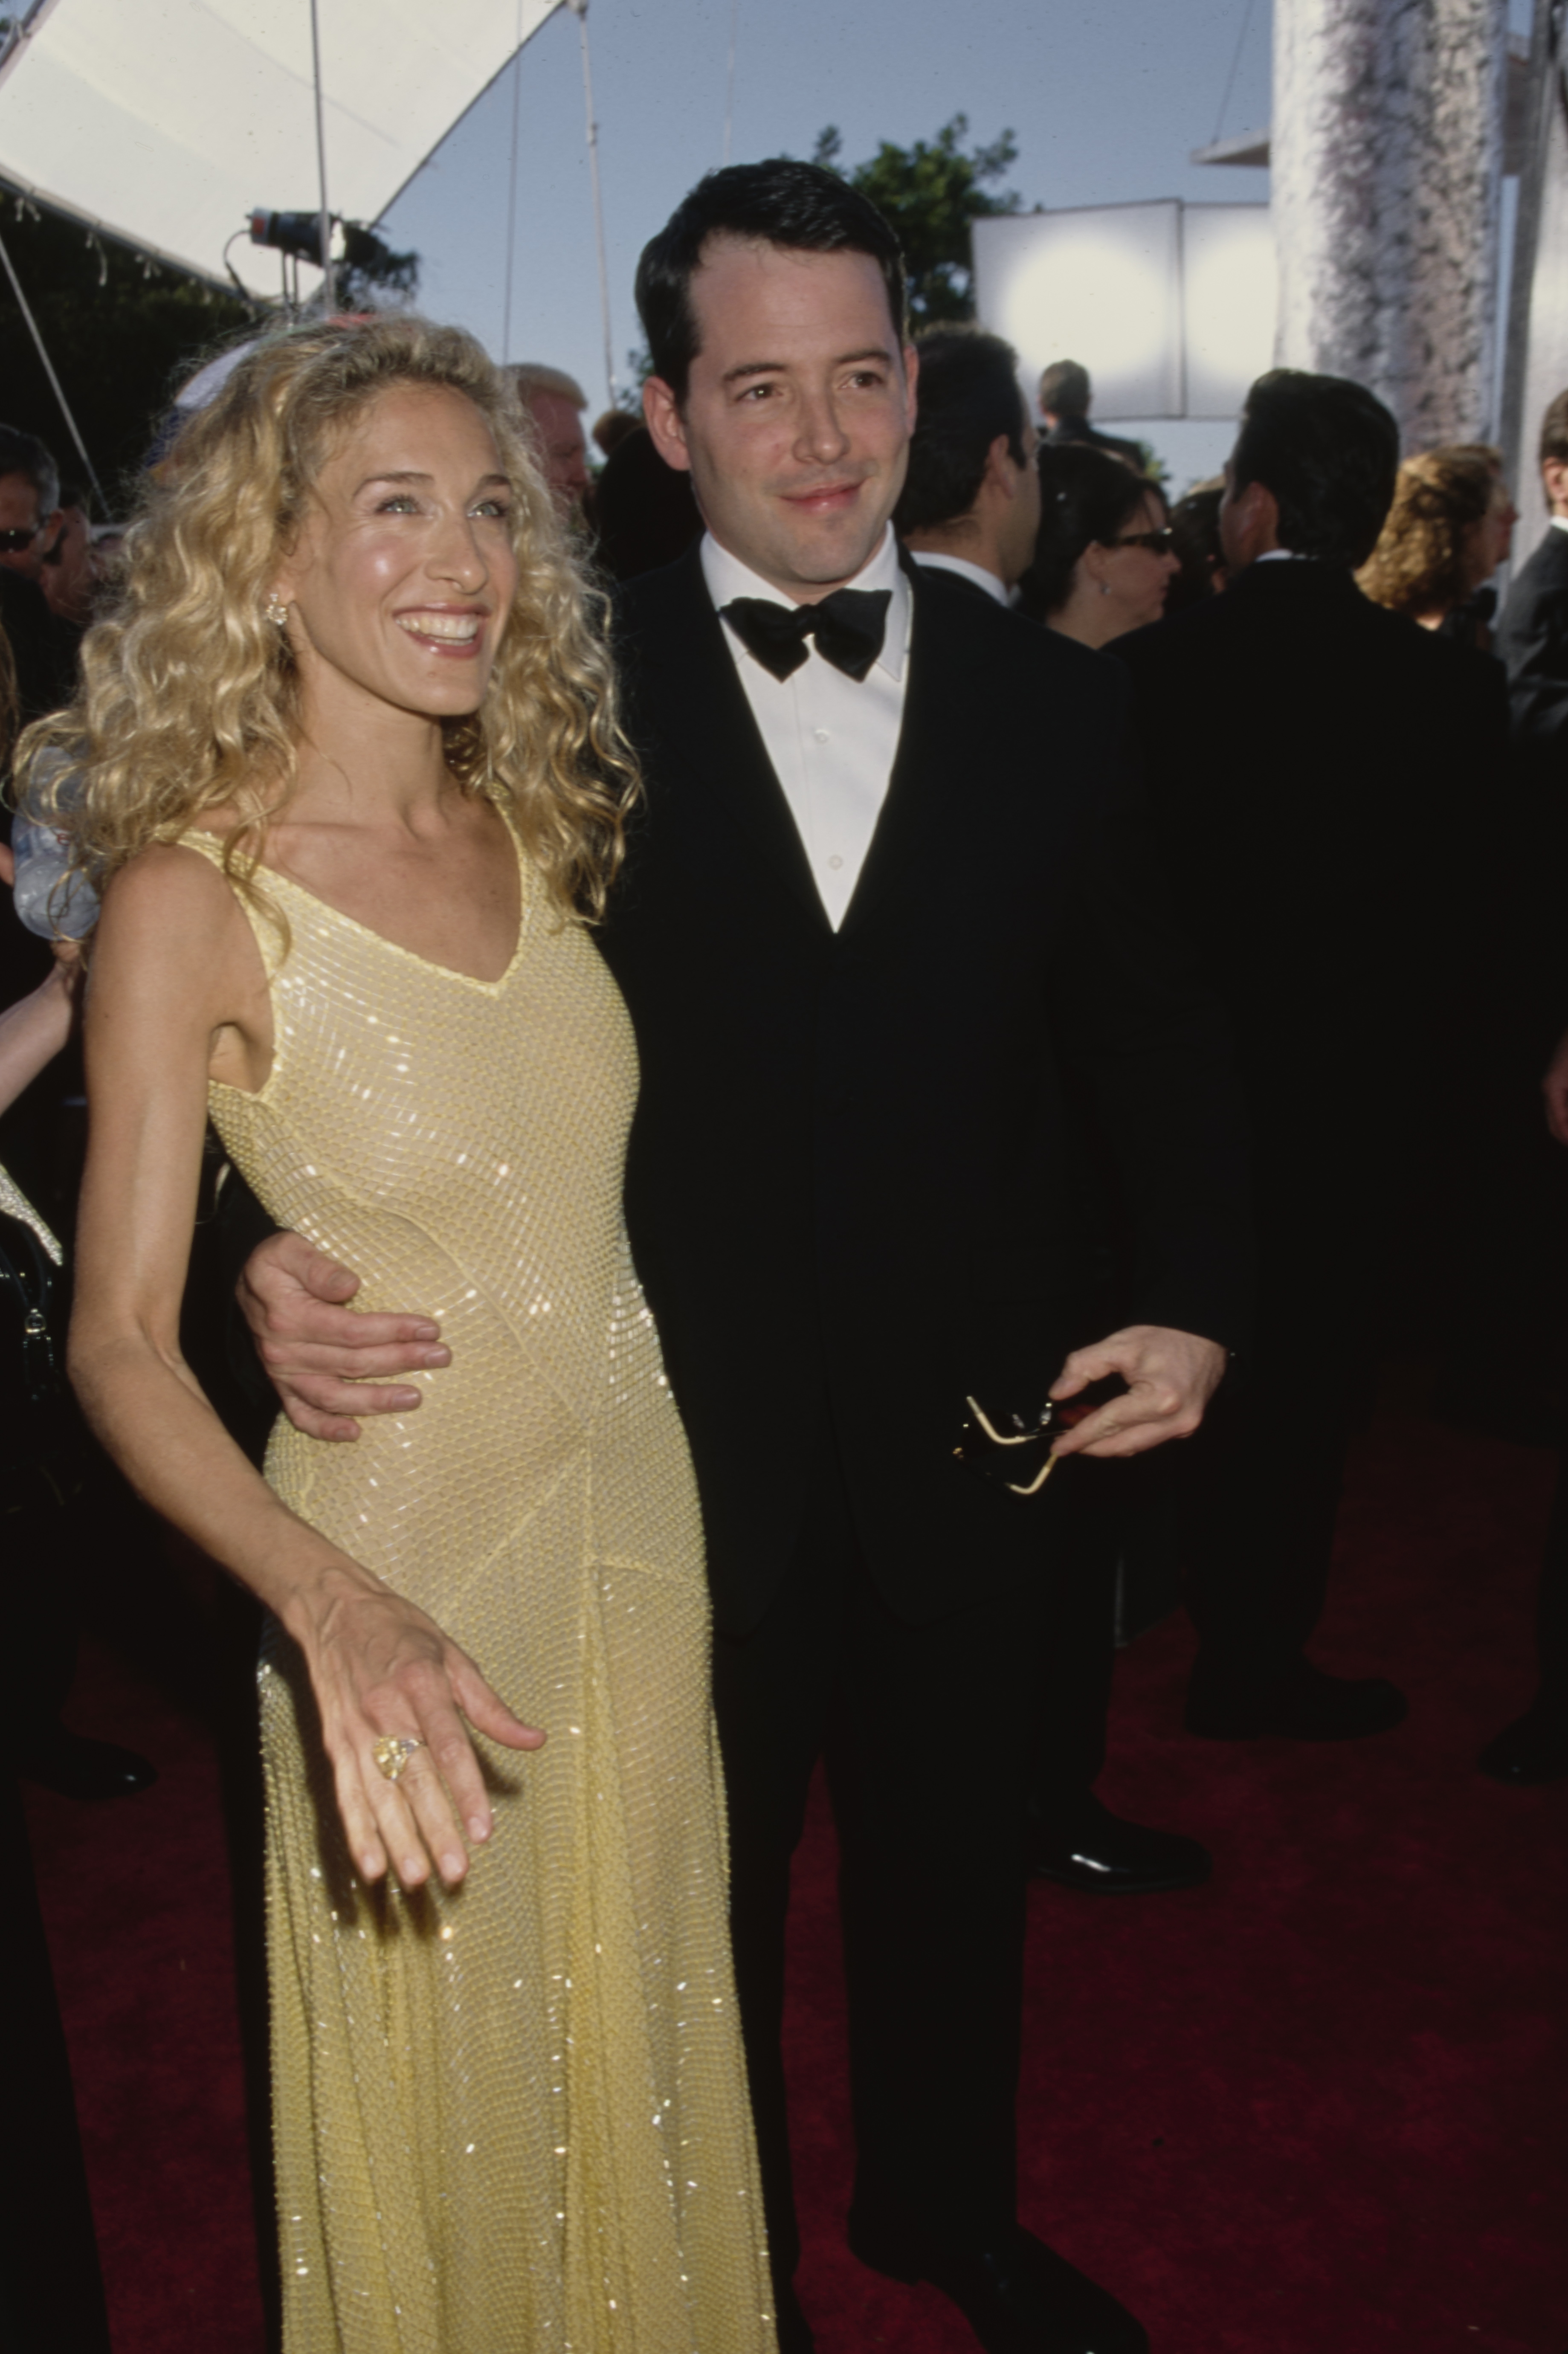 Sarah Jessica Parker and her husband Matthew Broderick in Los Angeles, California, September 12, 1999. | Source: Getty Images